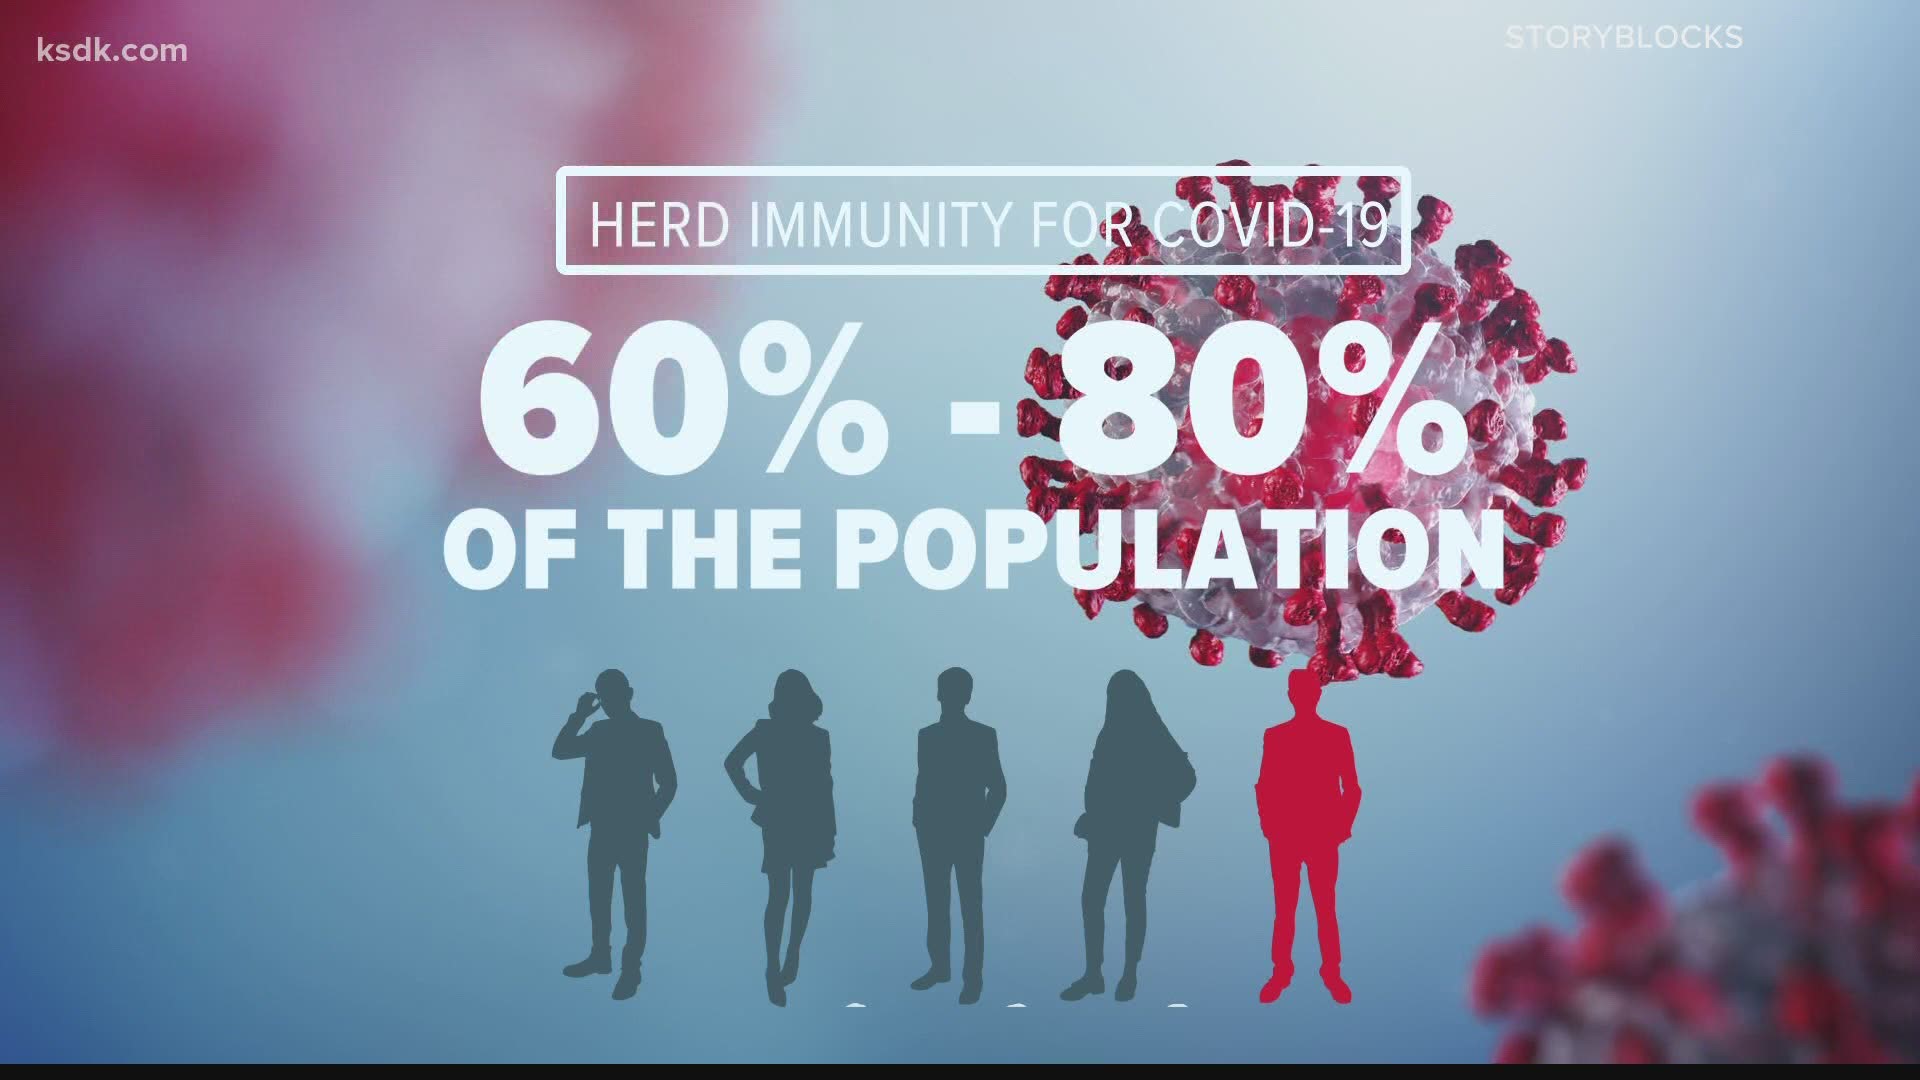 The more infectious a disease is the more people need to be immune to achieve herd immunity. But because COVID-19 is so new, it comes with a lot of questions